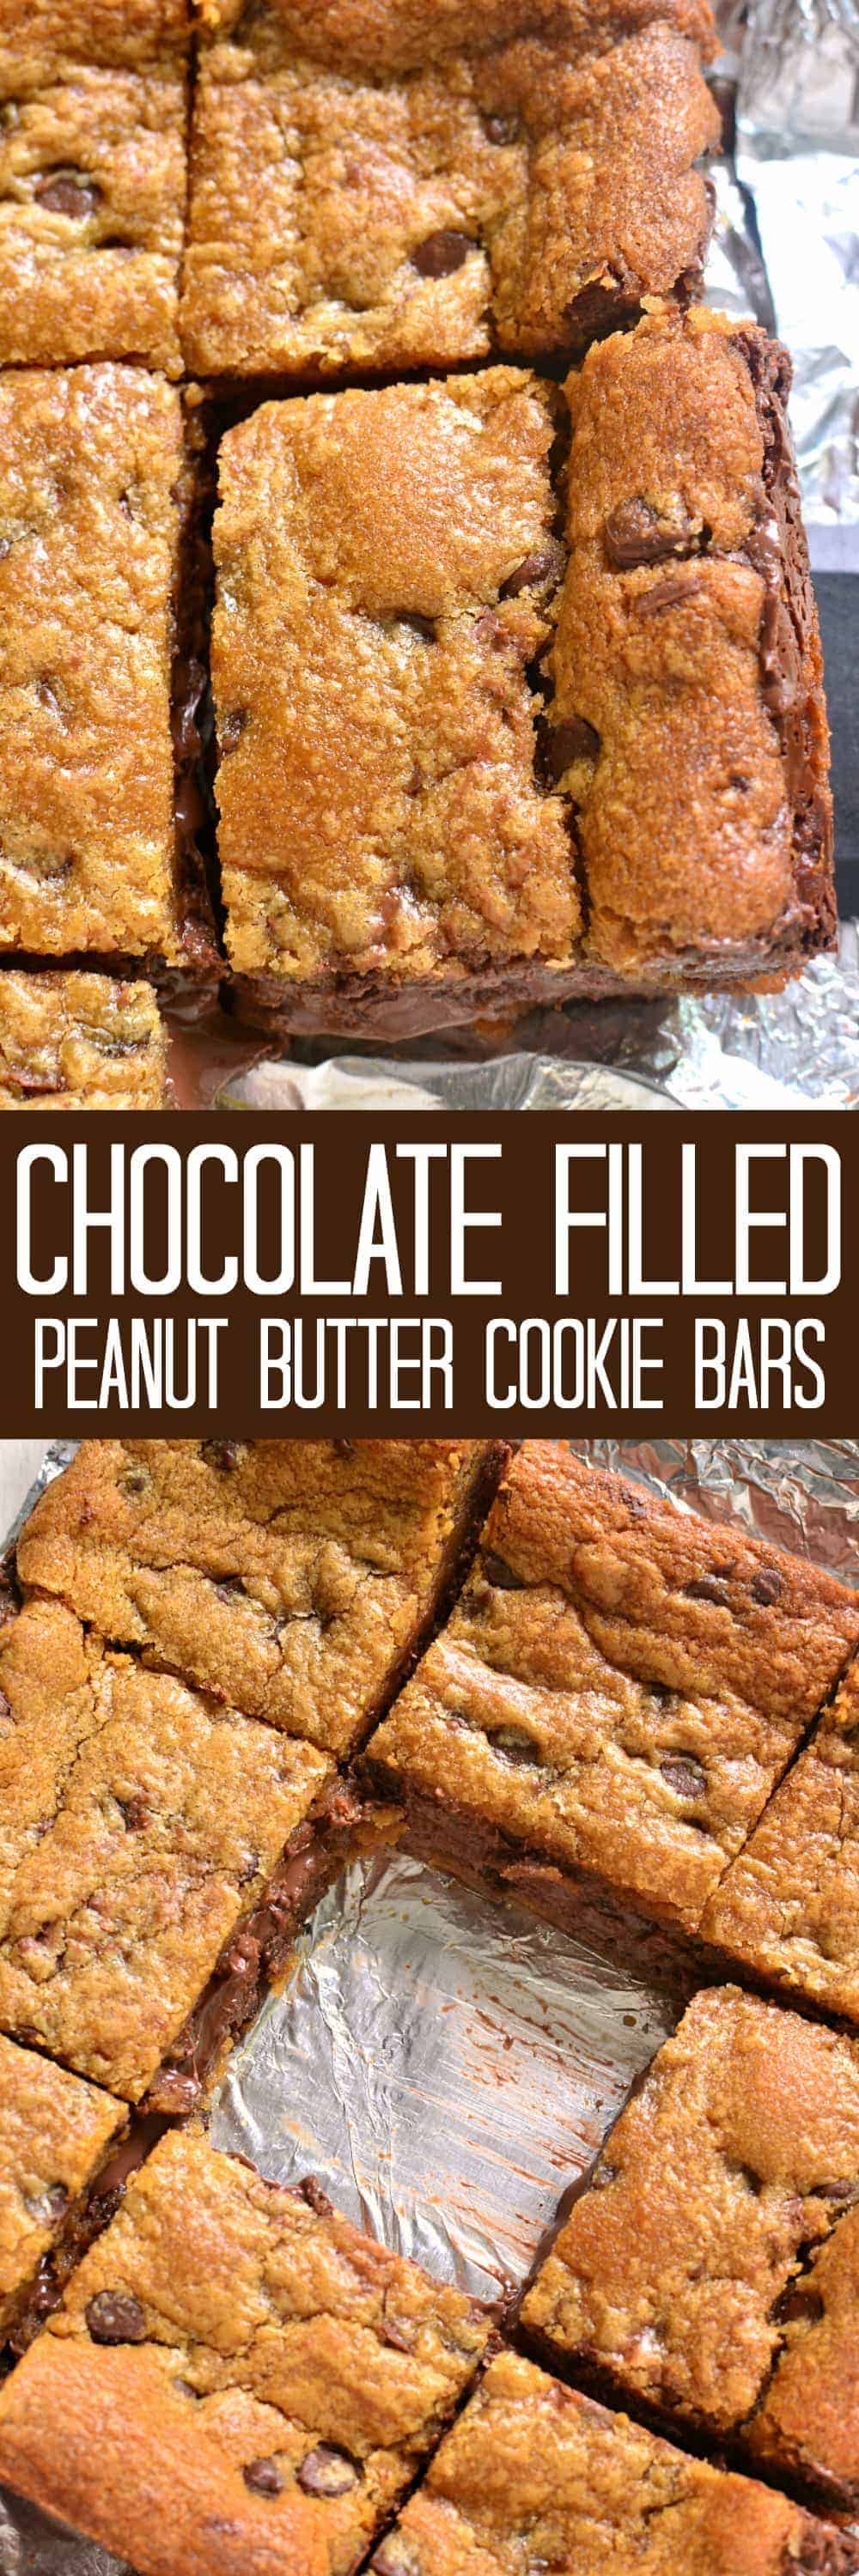 2-ingredient Chocolate Filled Peanut Butter Cookie Bars. Oven ready in under 5 minutes, and SO delicious!